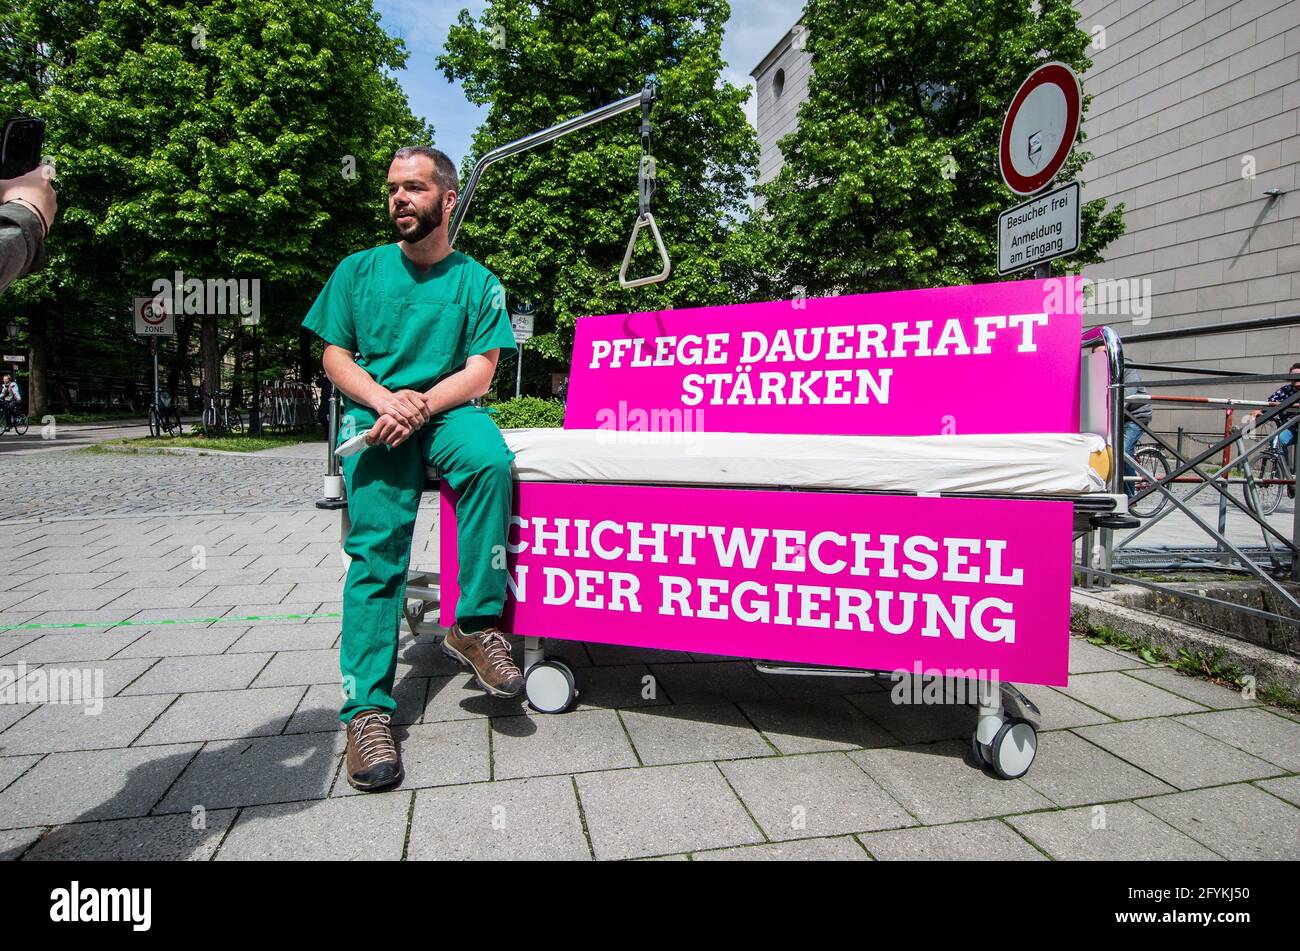 Munich, Bavaria, Germany. 28th May, 2021. ANDREAS KRAHL of the Bavarian Greens wearing his hospital scrubs Kahl works in an Intensive Care Unit in Murnau and detailed the poor treatment of the healthcare workers by the Bavarian government that promotes overwork, poorer care quality, and burnout syndrome. The Bavarian Greens (die Gruenen/Buendnis90) organized a protest action at the Bavarian Staatskanzlei (government building) in support of healthcare workers. During the Coronavirus crisis, the working conditions for this sector have come into greater focus and The Greens are pushing for bette Stock Photo